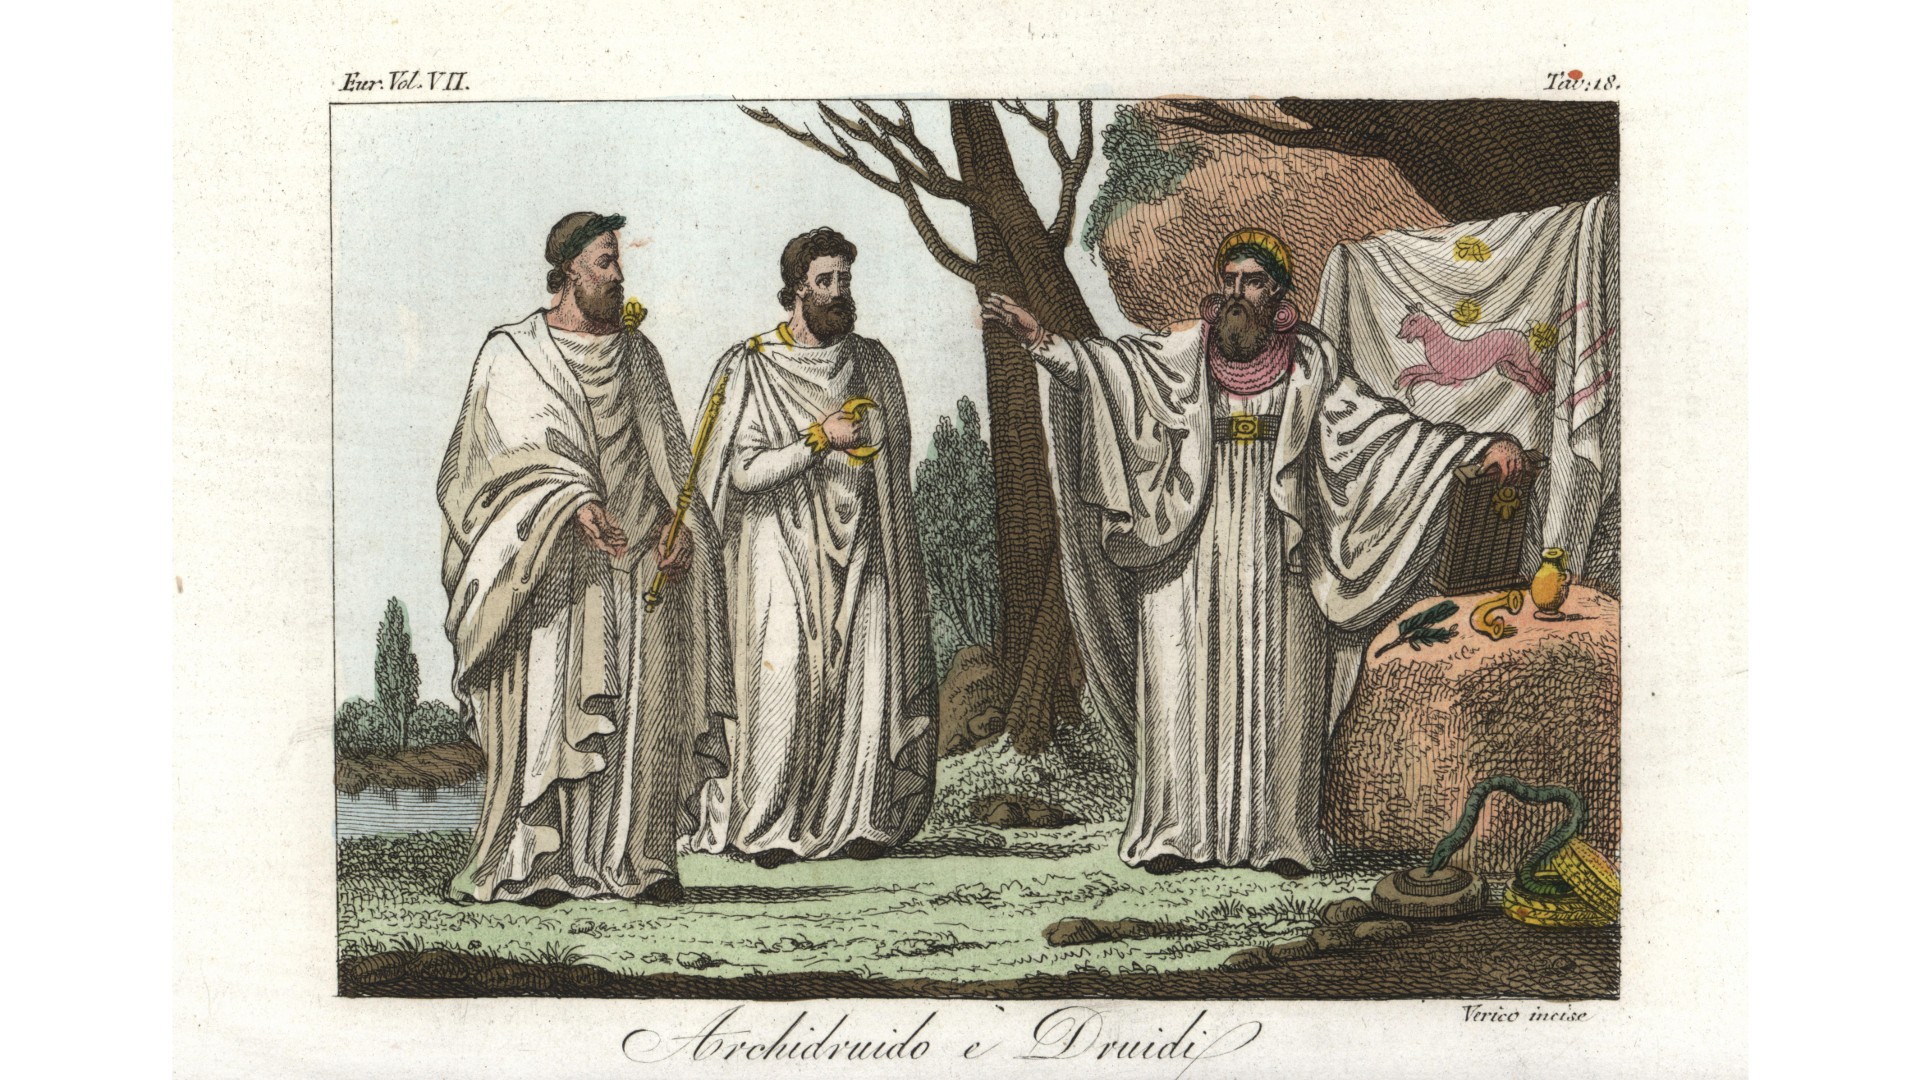 Handcoloured copperplate engraving by Verico. It shows two druids and a priest in sacred robes with religious paraphernalia, gold vessels, serpent, and painted curtain.